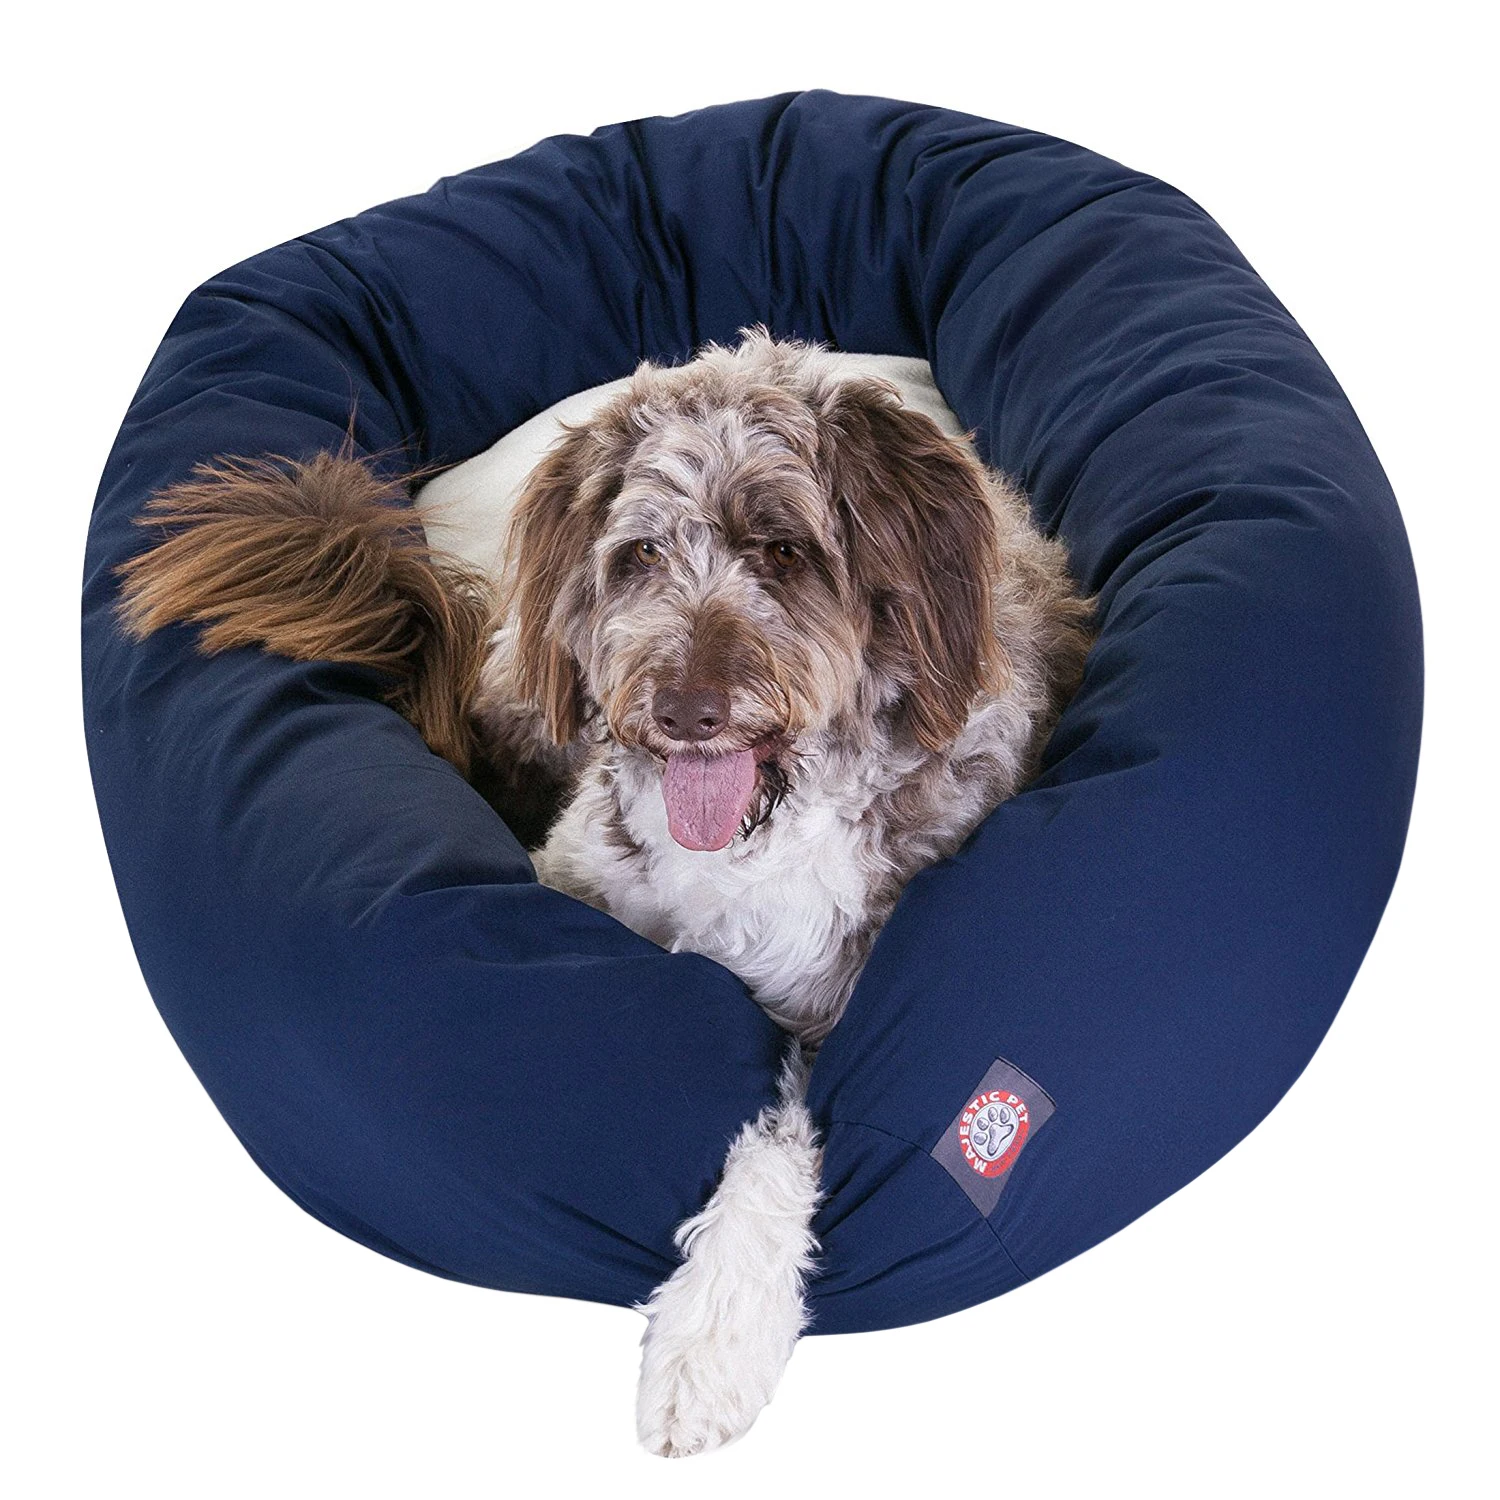 

New Sherpa Bagel Pet Bed For Dogs, Blue, Extra Large Soft Sleep House Cushion Pet Product Accessories